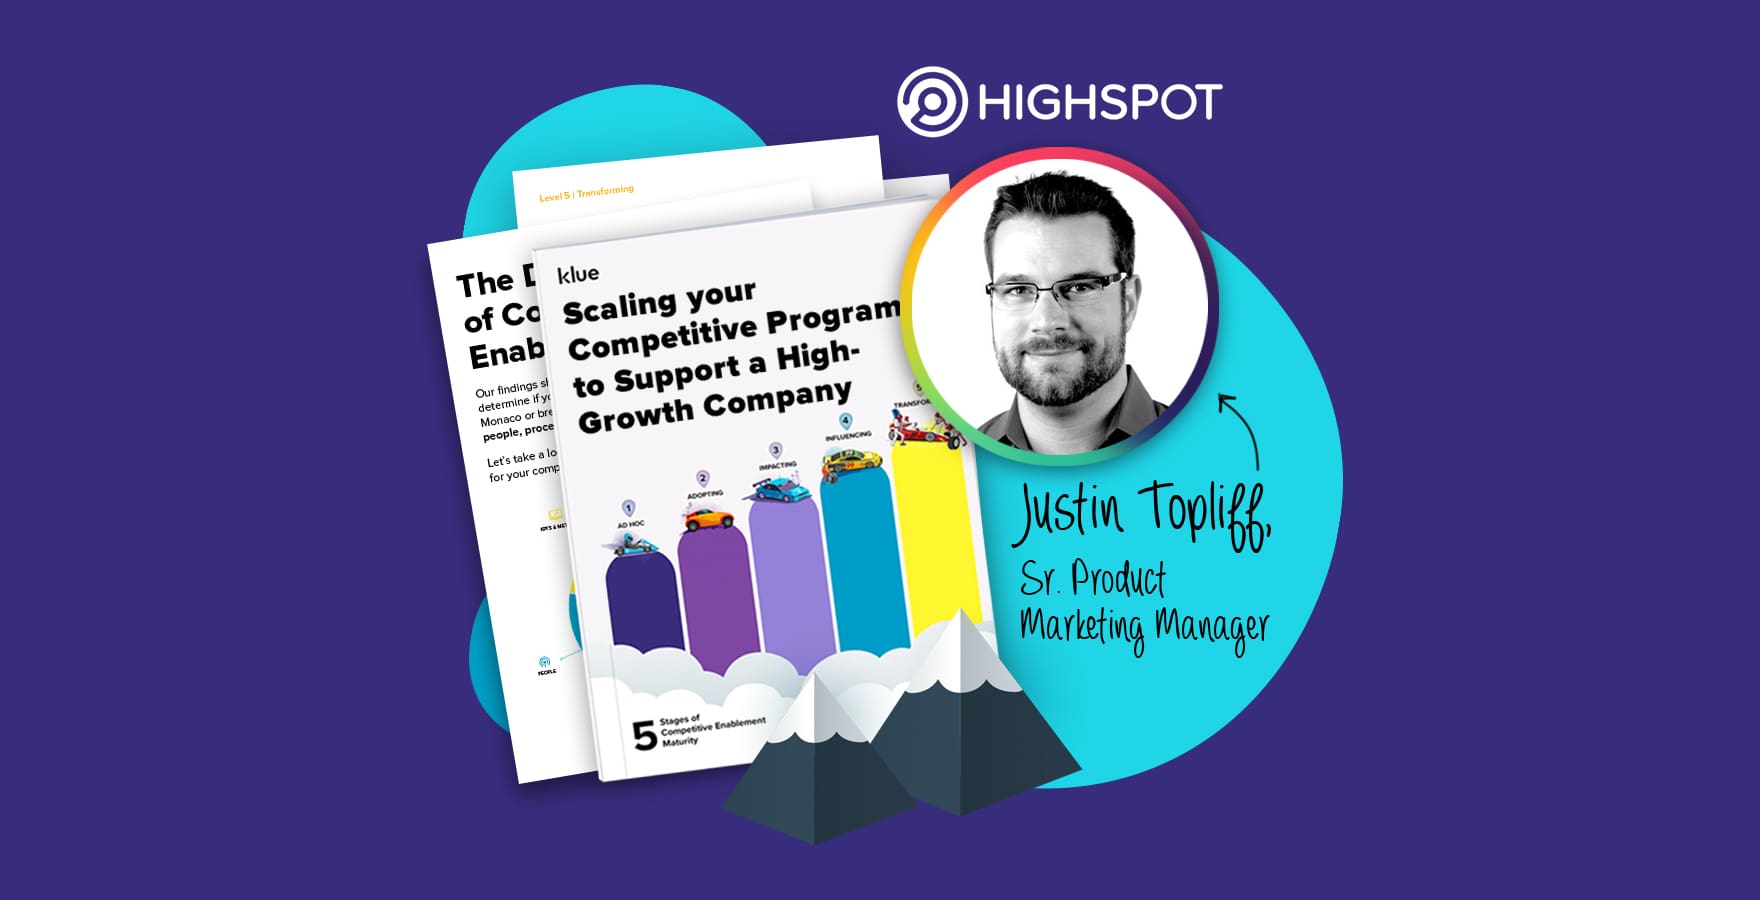 Scaling-your-Competitive-Program-to-Support-a-High-Growth-Company-A-conversation-with-Justin-Topliff-Sr.-PMM-@-Highspot_FEATUREV2